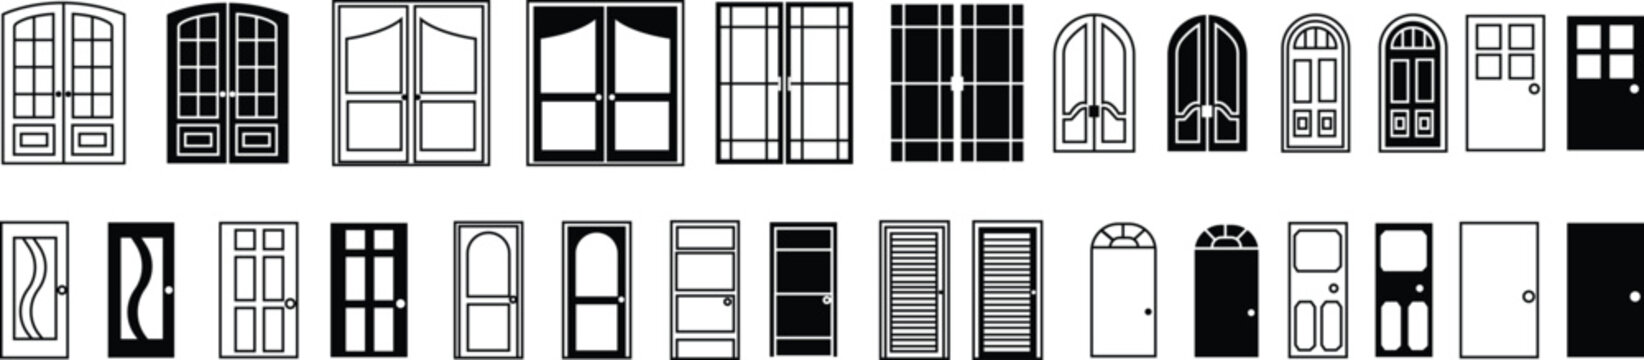 Set of Door icons. Entry illustration signs. Emergency exit symbols. black Icons in trendy flat styles editable stock on transparent background. door symbols for your web site designs, logos, app, UI.